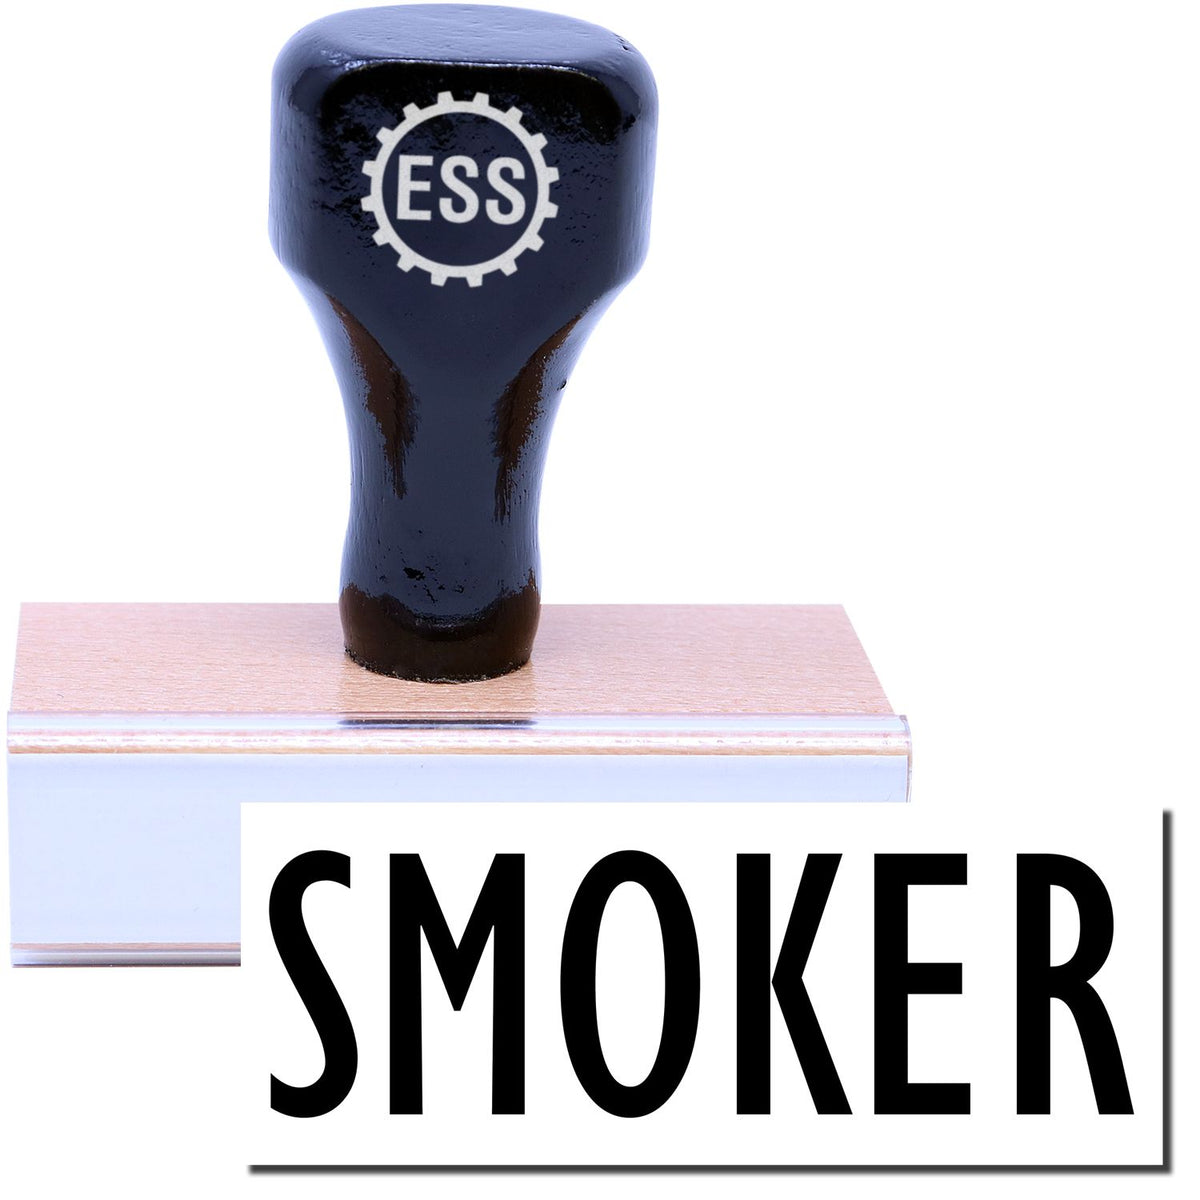 A stock office medical rubber stamp with a stamped image showing how the text &quot;SMOKER&quot; is displayed after stamping.